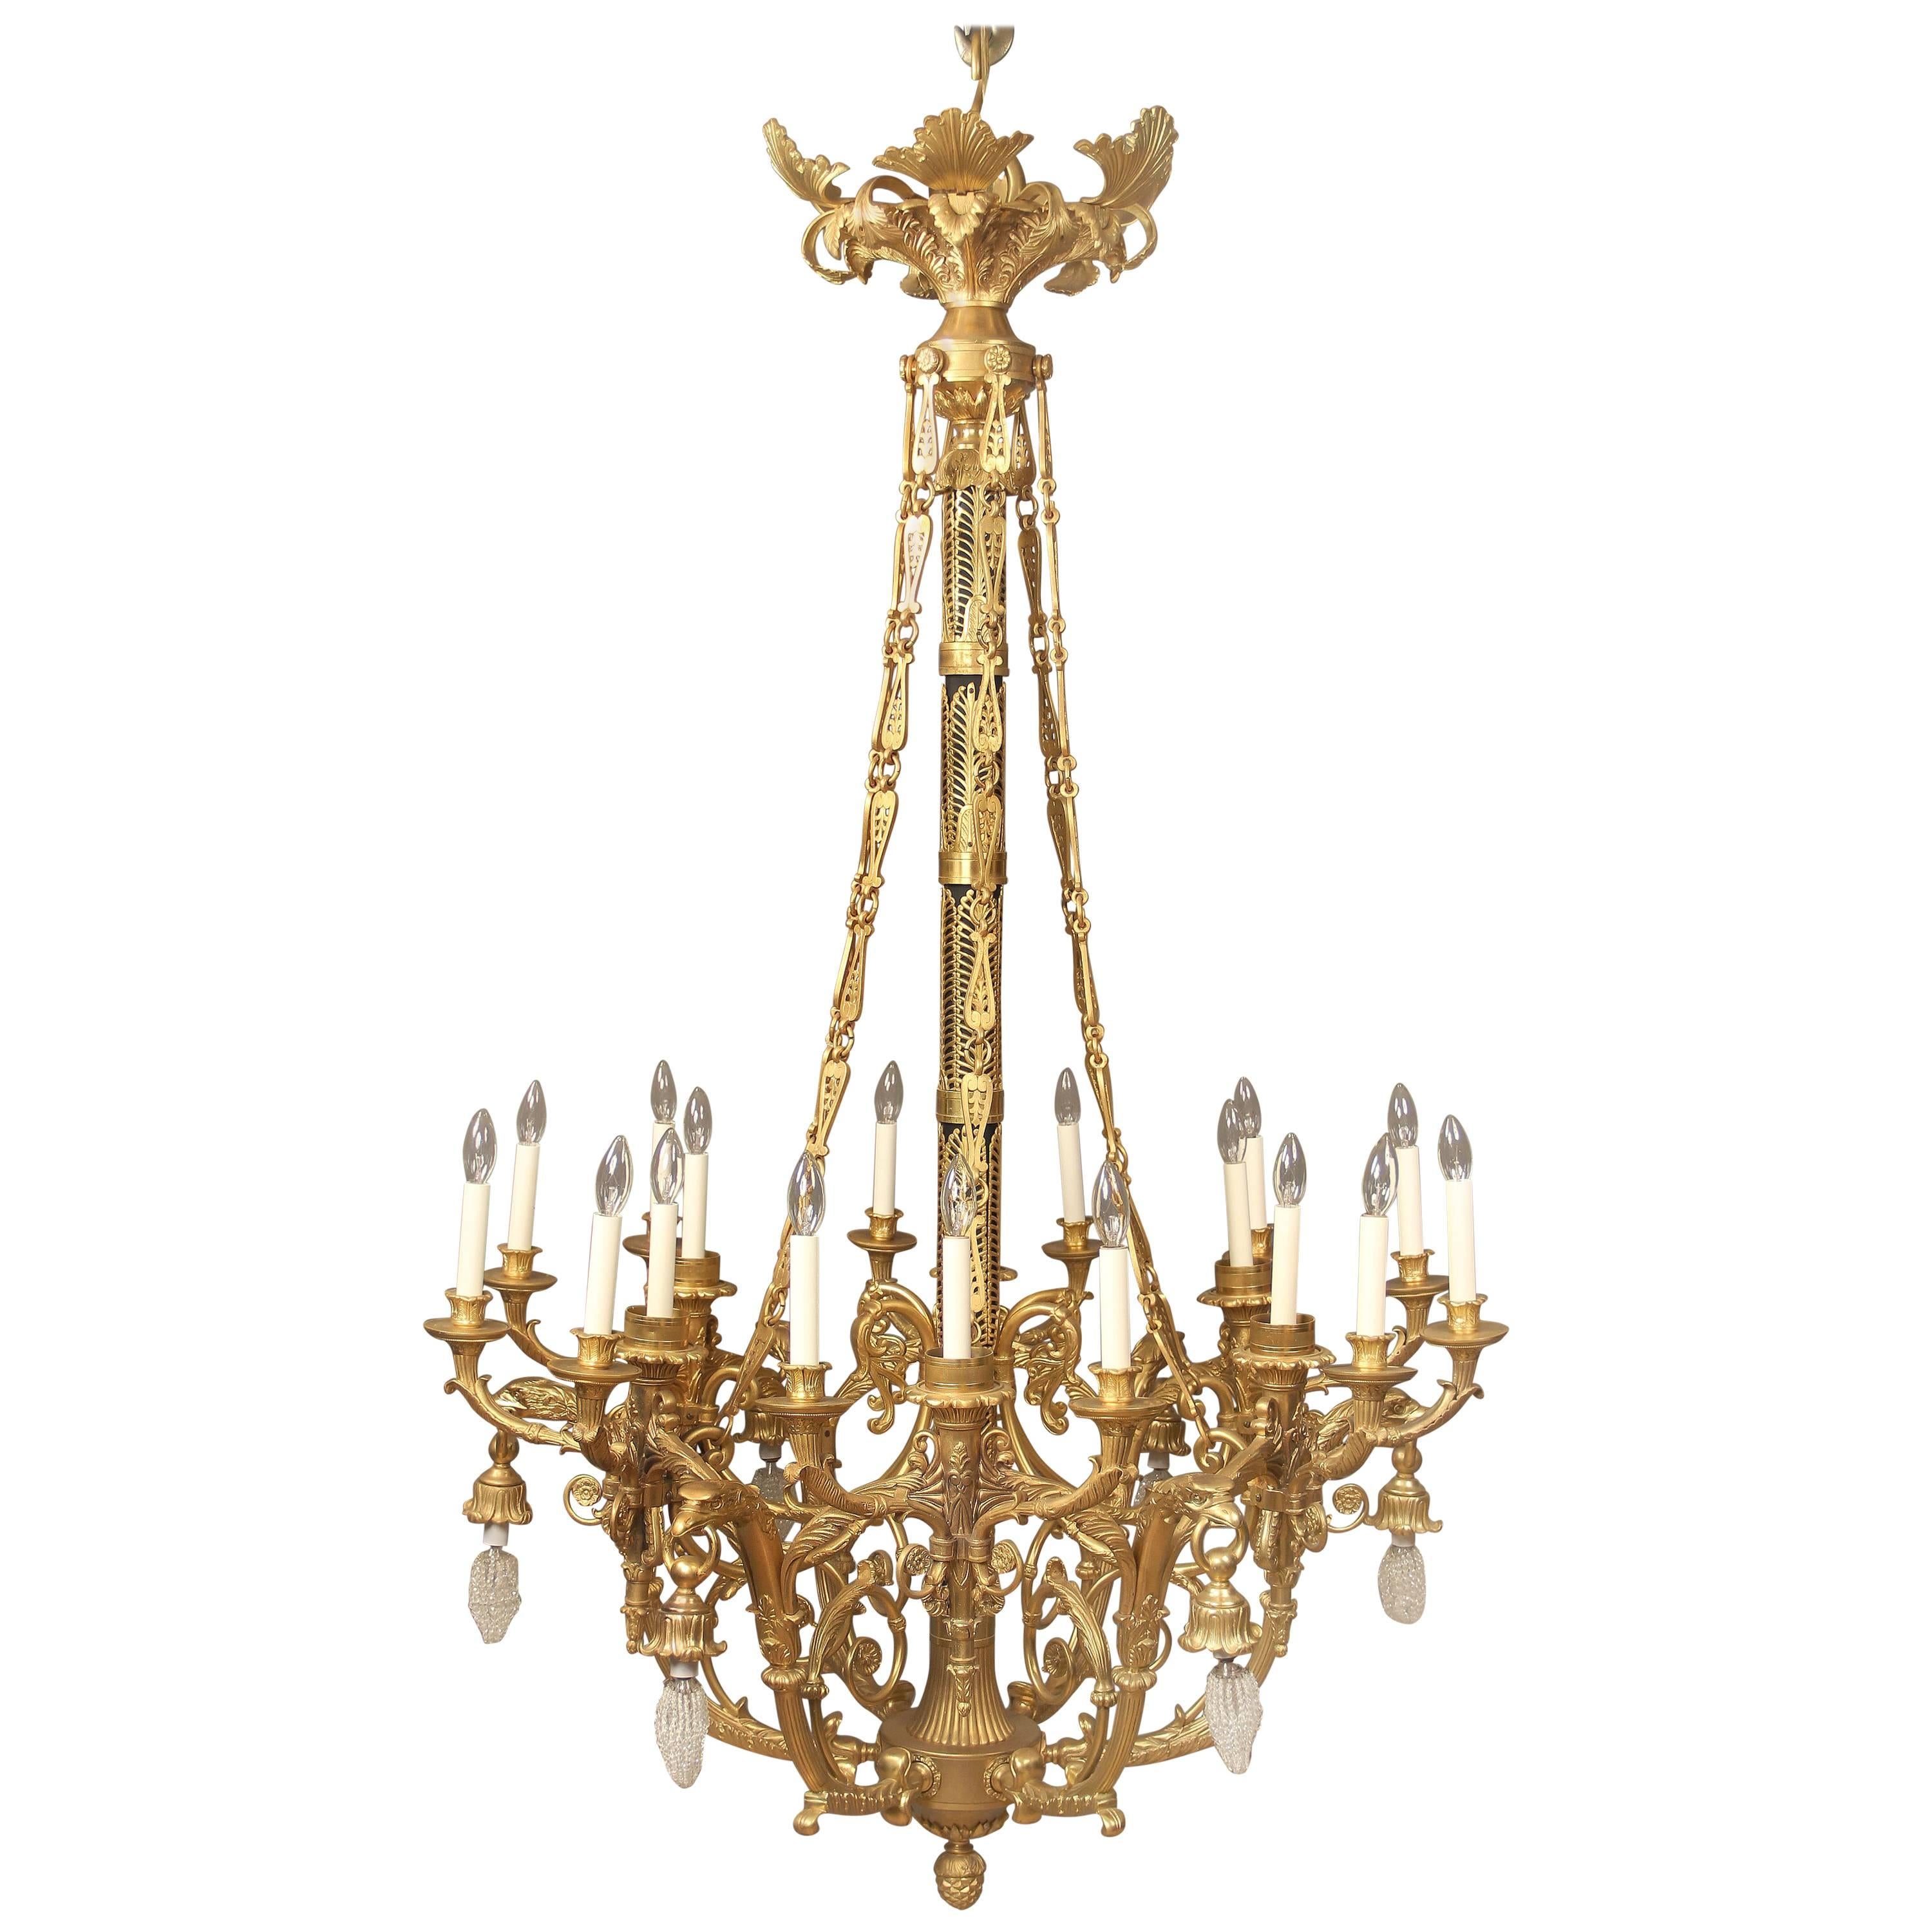 Large and Important Early 20th Century Gilt Bronze Empire Style Chandelier